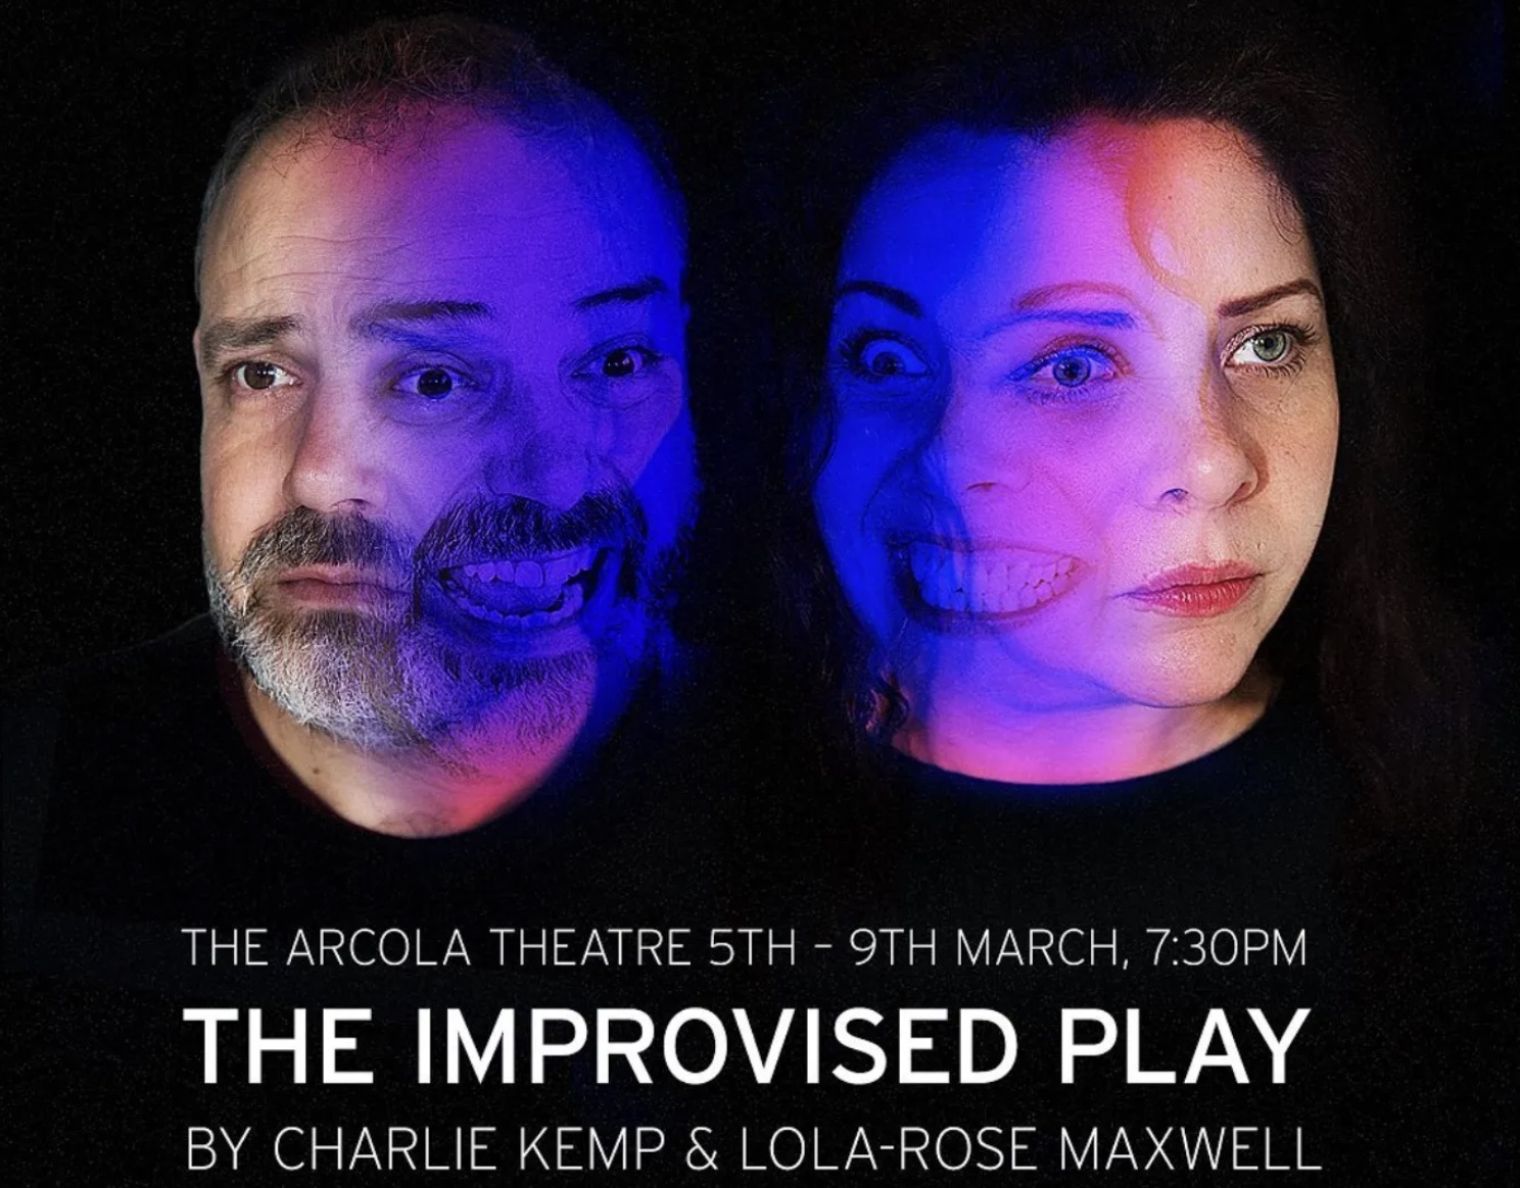 Lola-Rose Maxwell stars in ’The Improvised Play’ which opens tonight at London’s Arcola Theatre